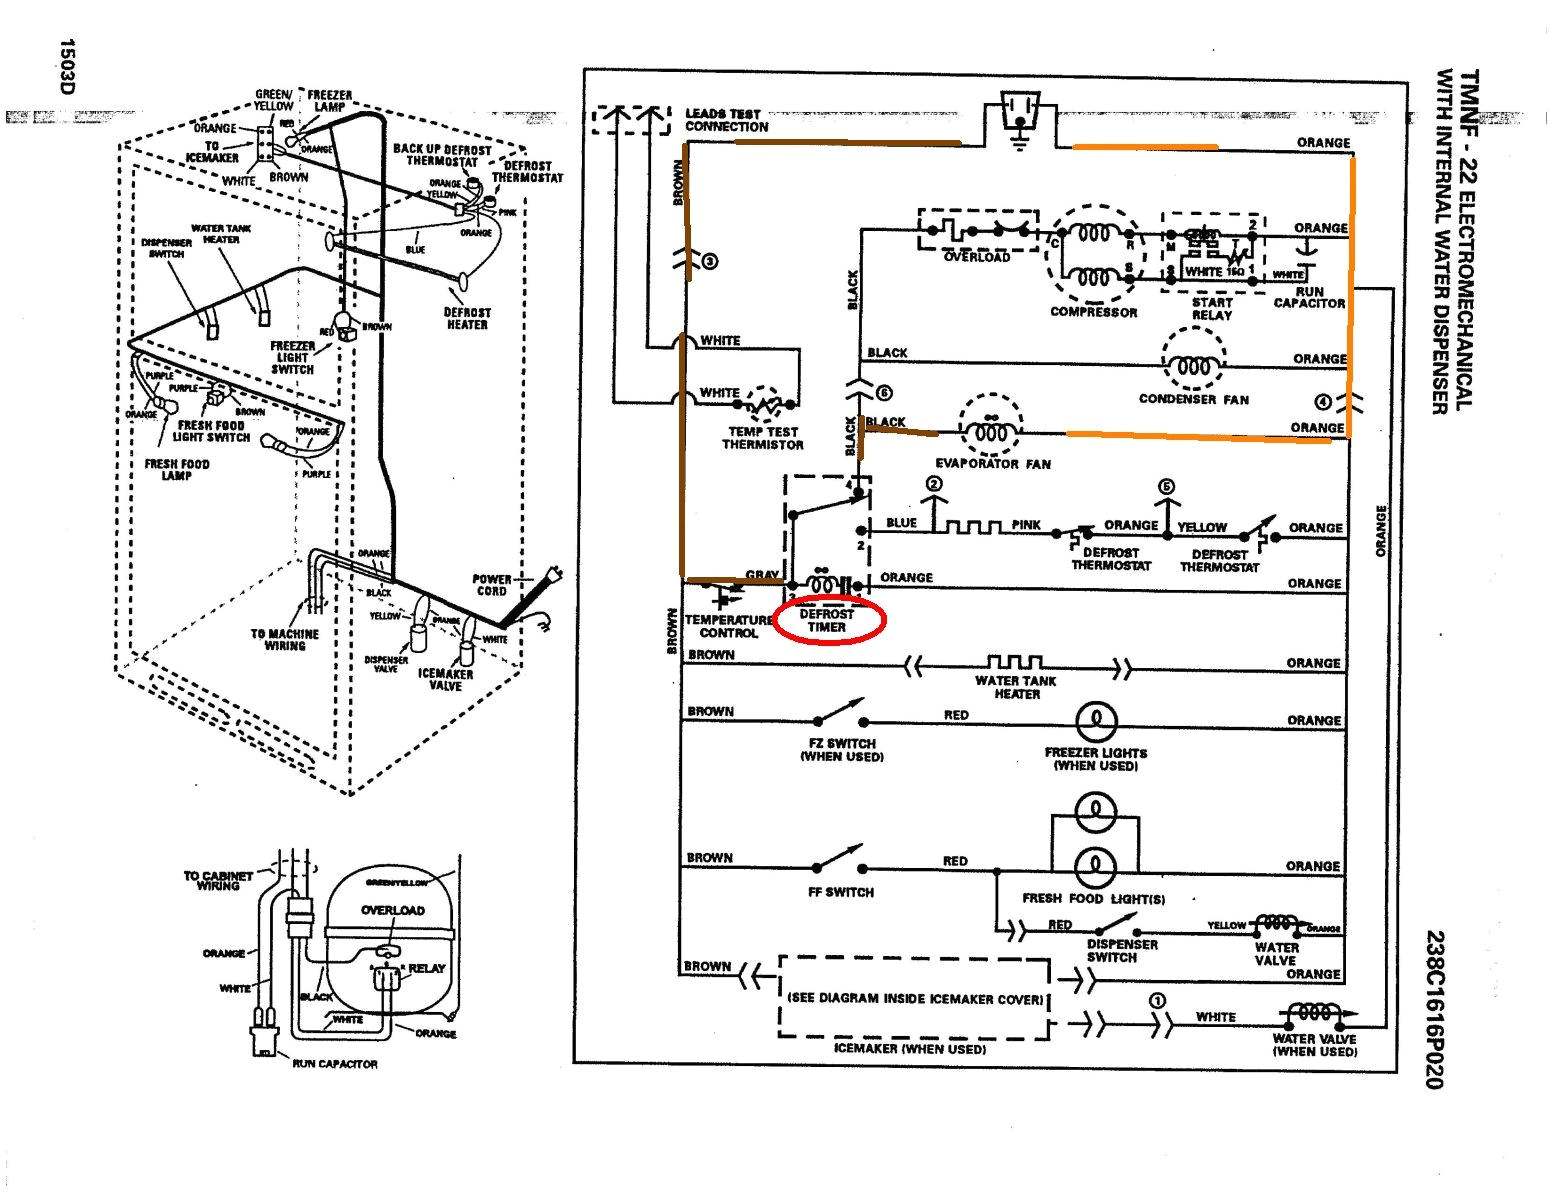 hotpoint dryer timer wiring diagram electric dryer wiring diagram besides ge electric dryer parts rh theiquest co 15r jpg